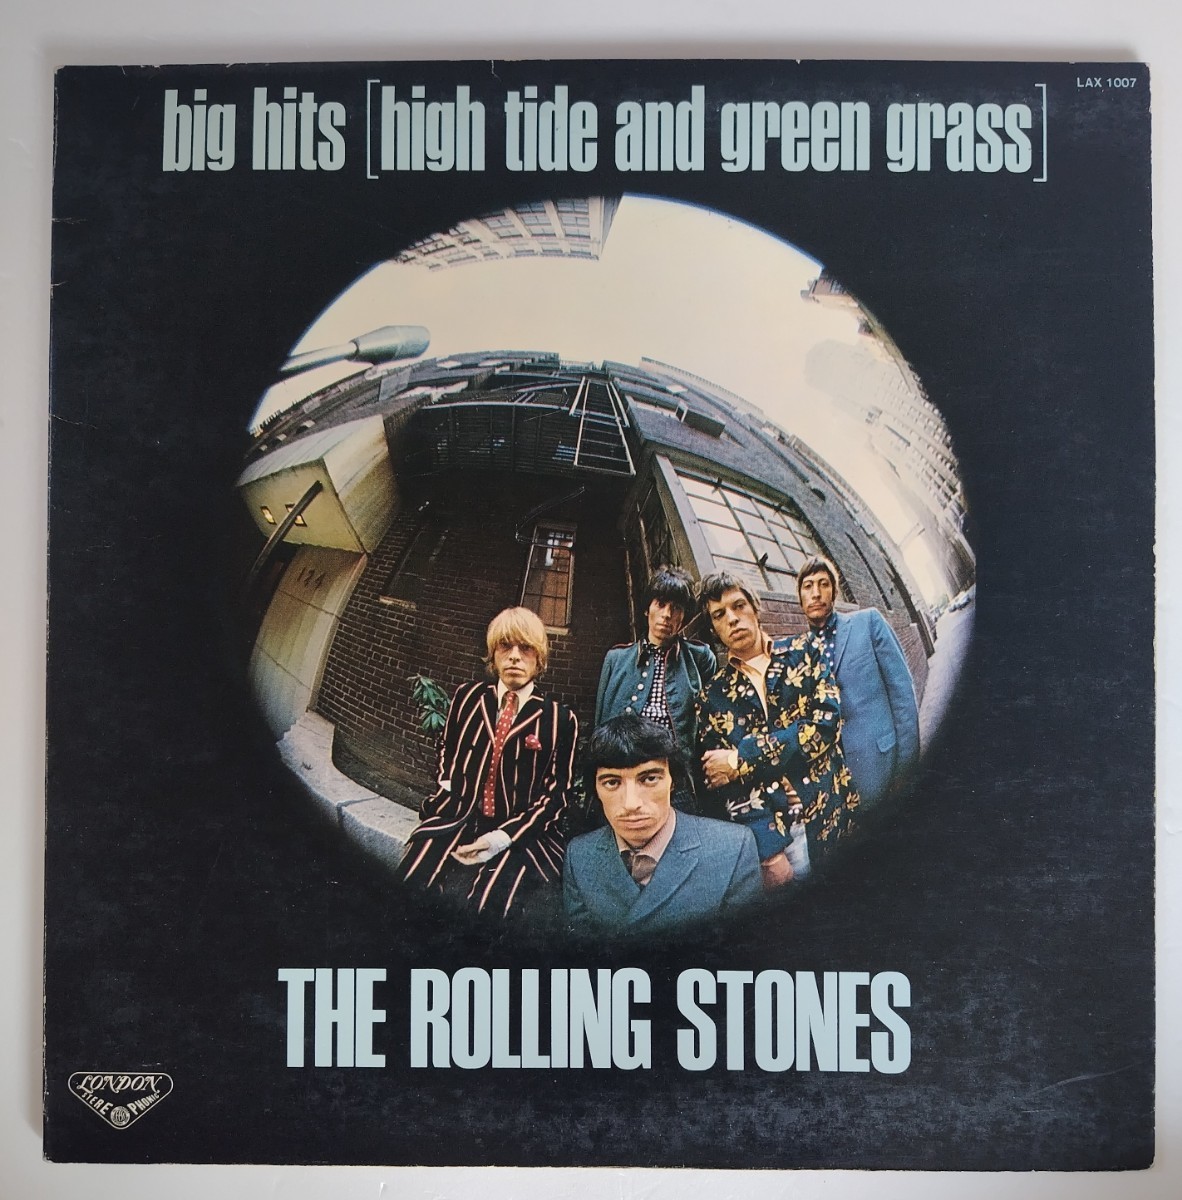 The Rolling Stones Big Hits [High Tide And Green Grass/1976年LAX-1007 ローリング・ストーンズワンオーナー保管品_画像1